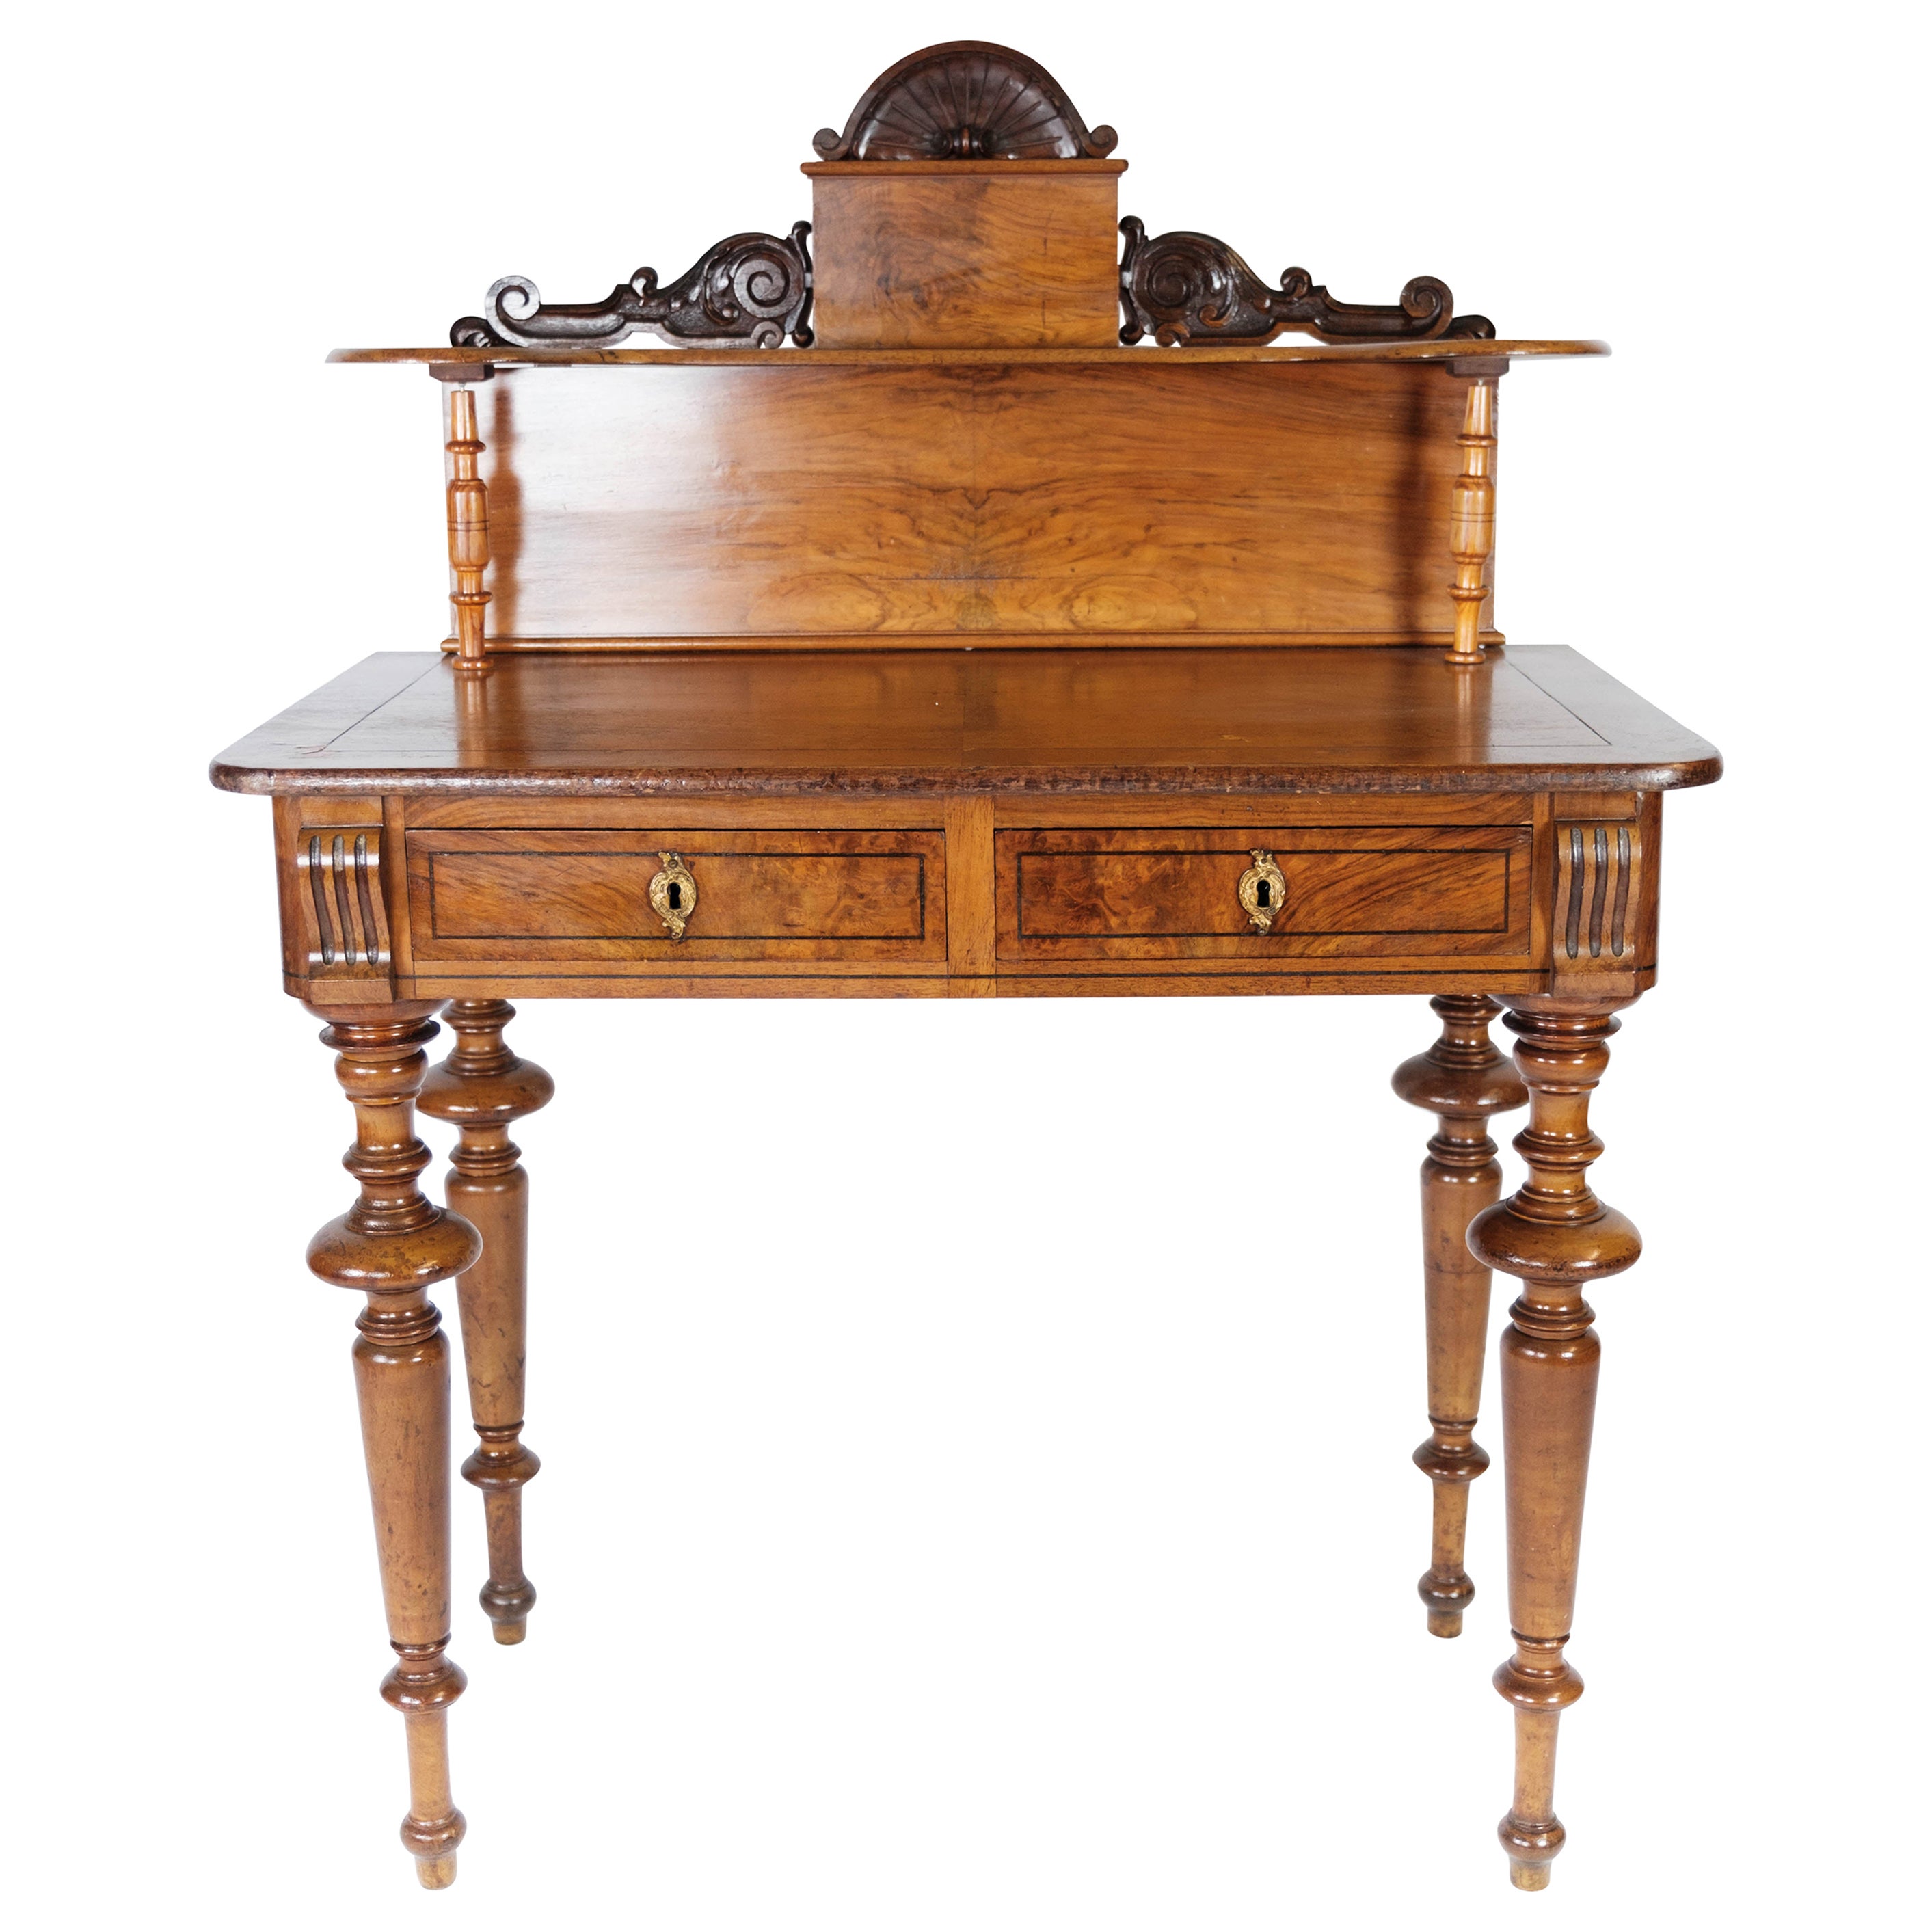 Dressing Table/Desk of Walnut and Decorated with Carvings, 1880s